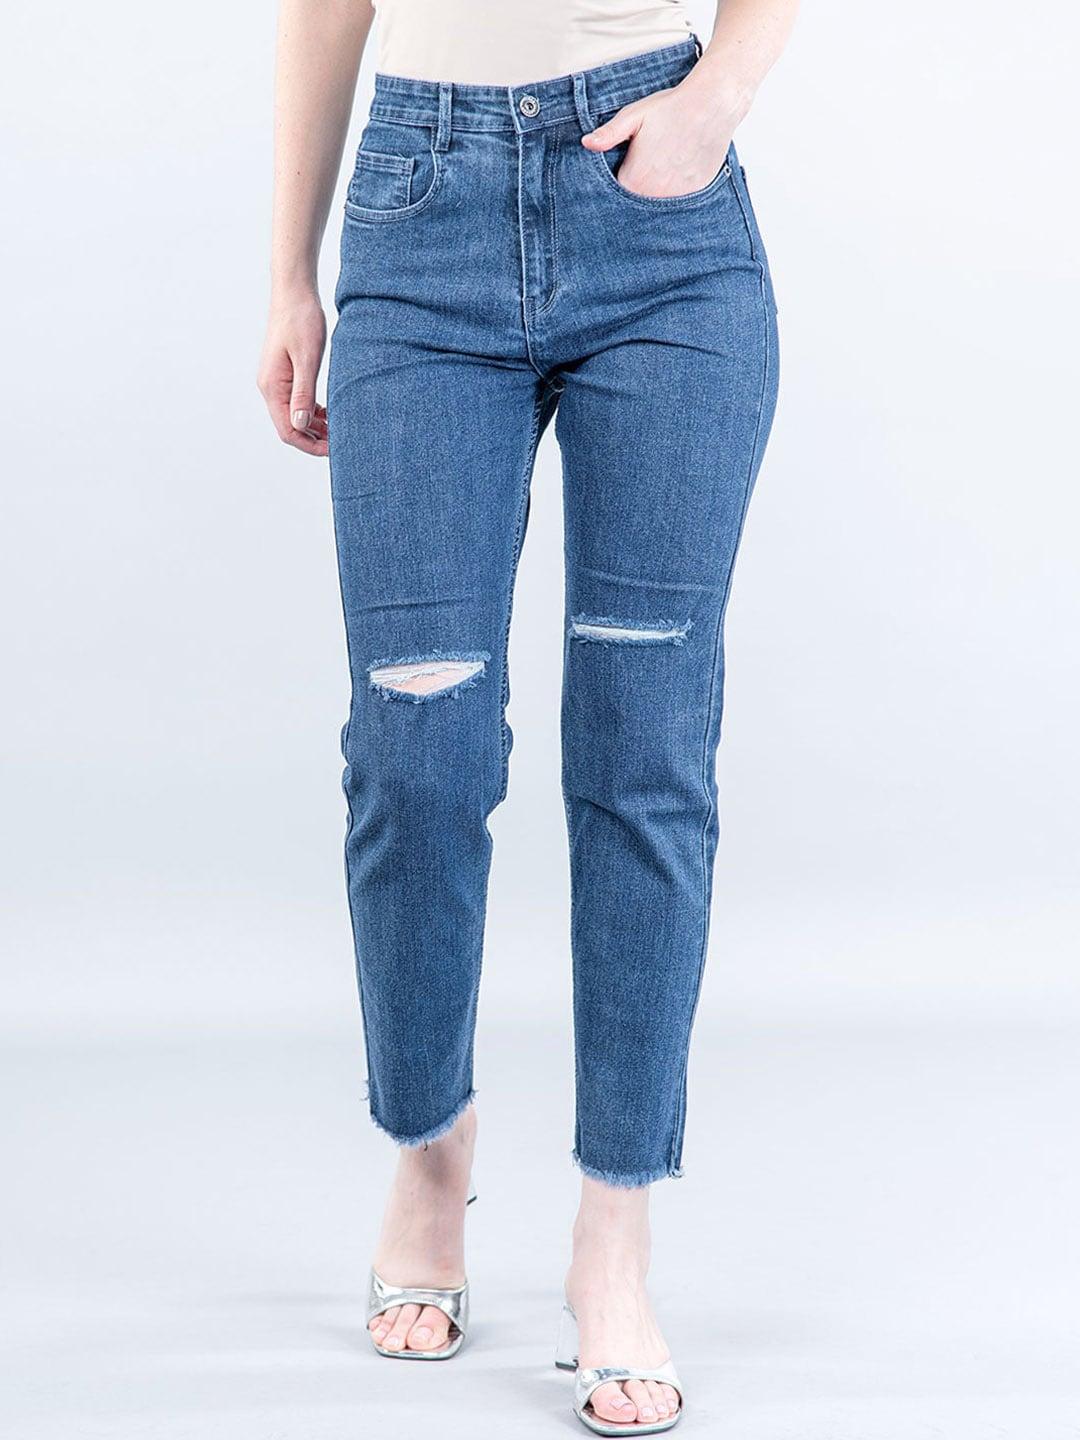 tistabene women comfort low distress stretchable jeans